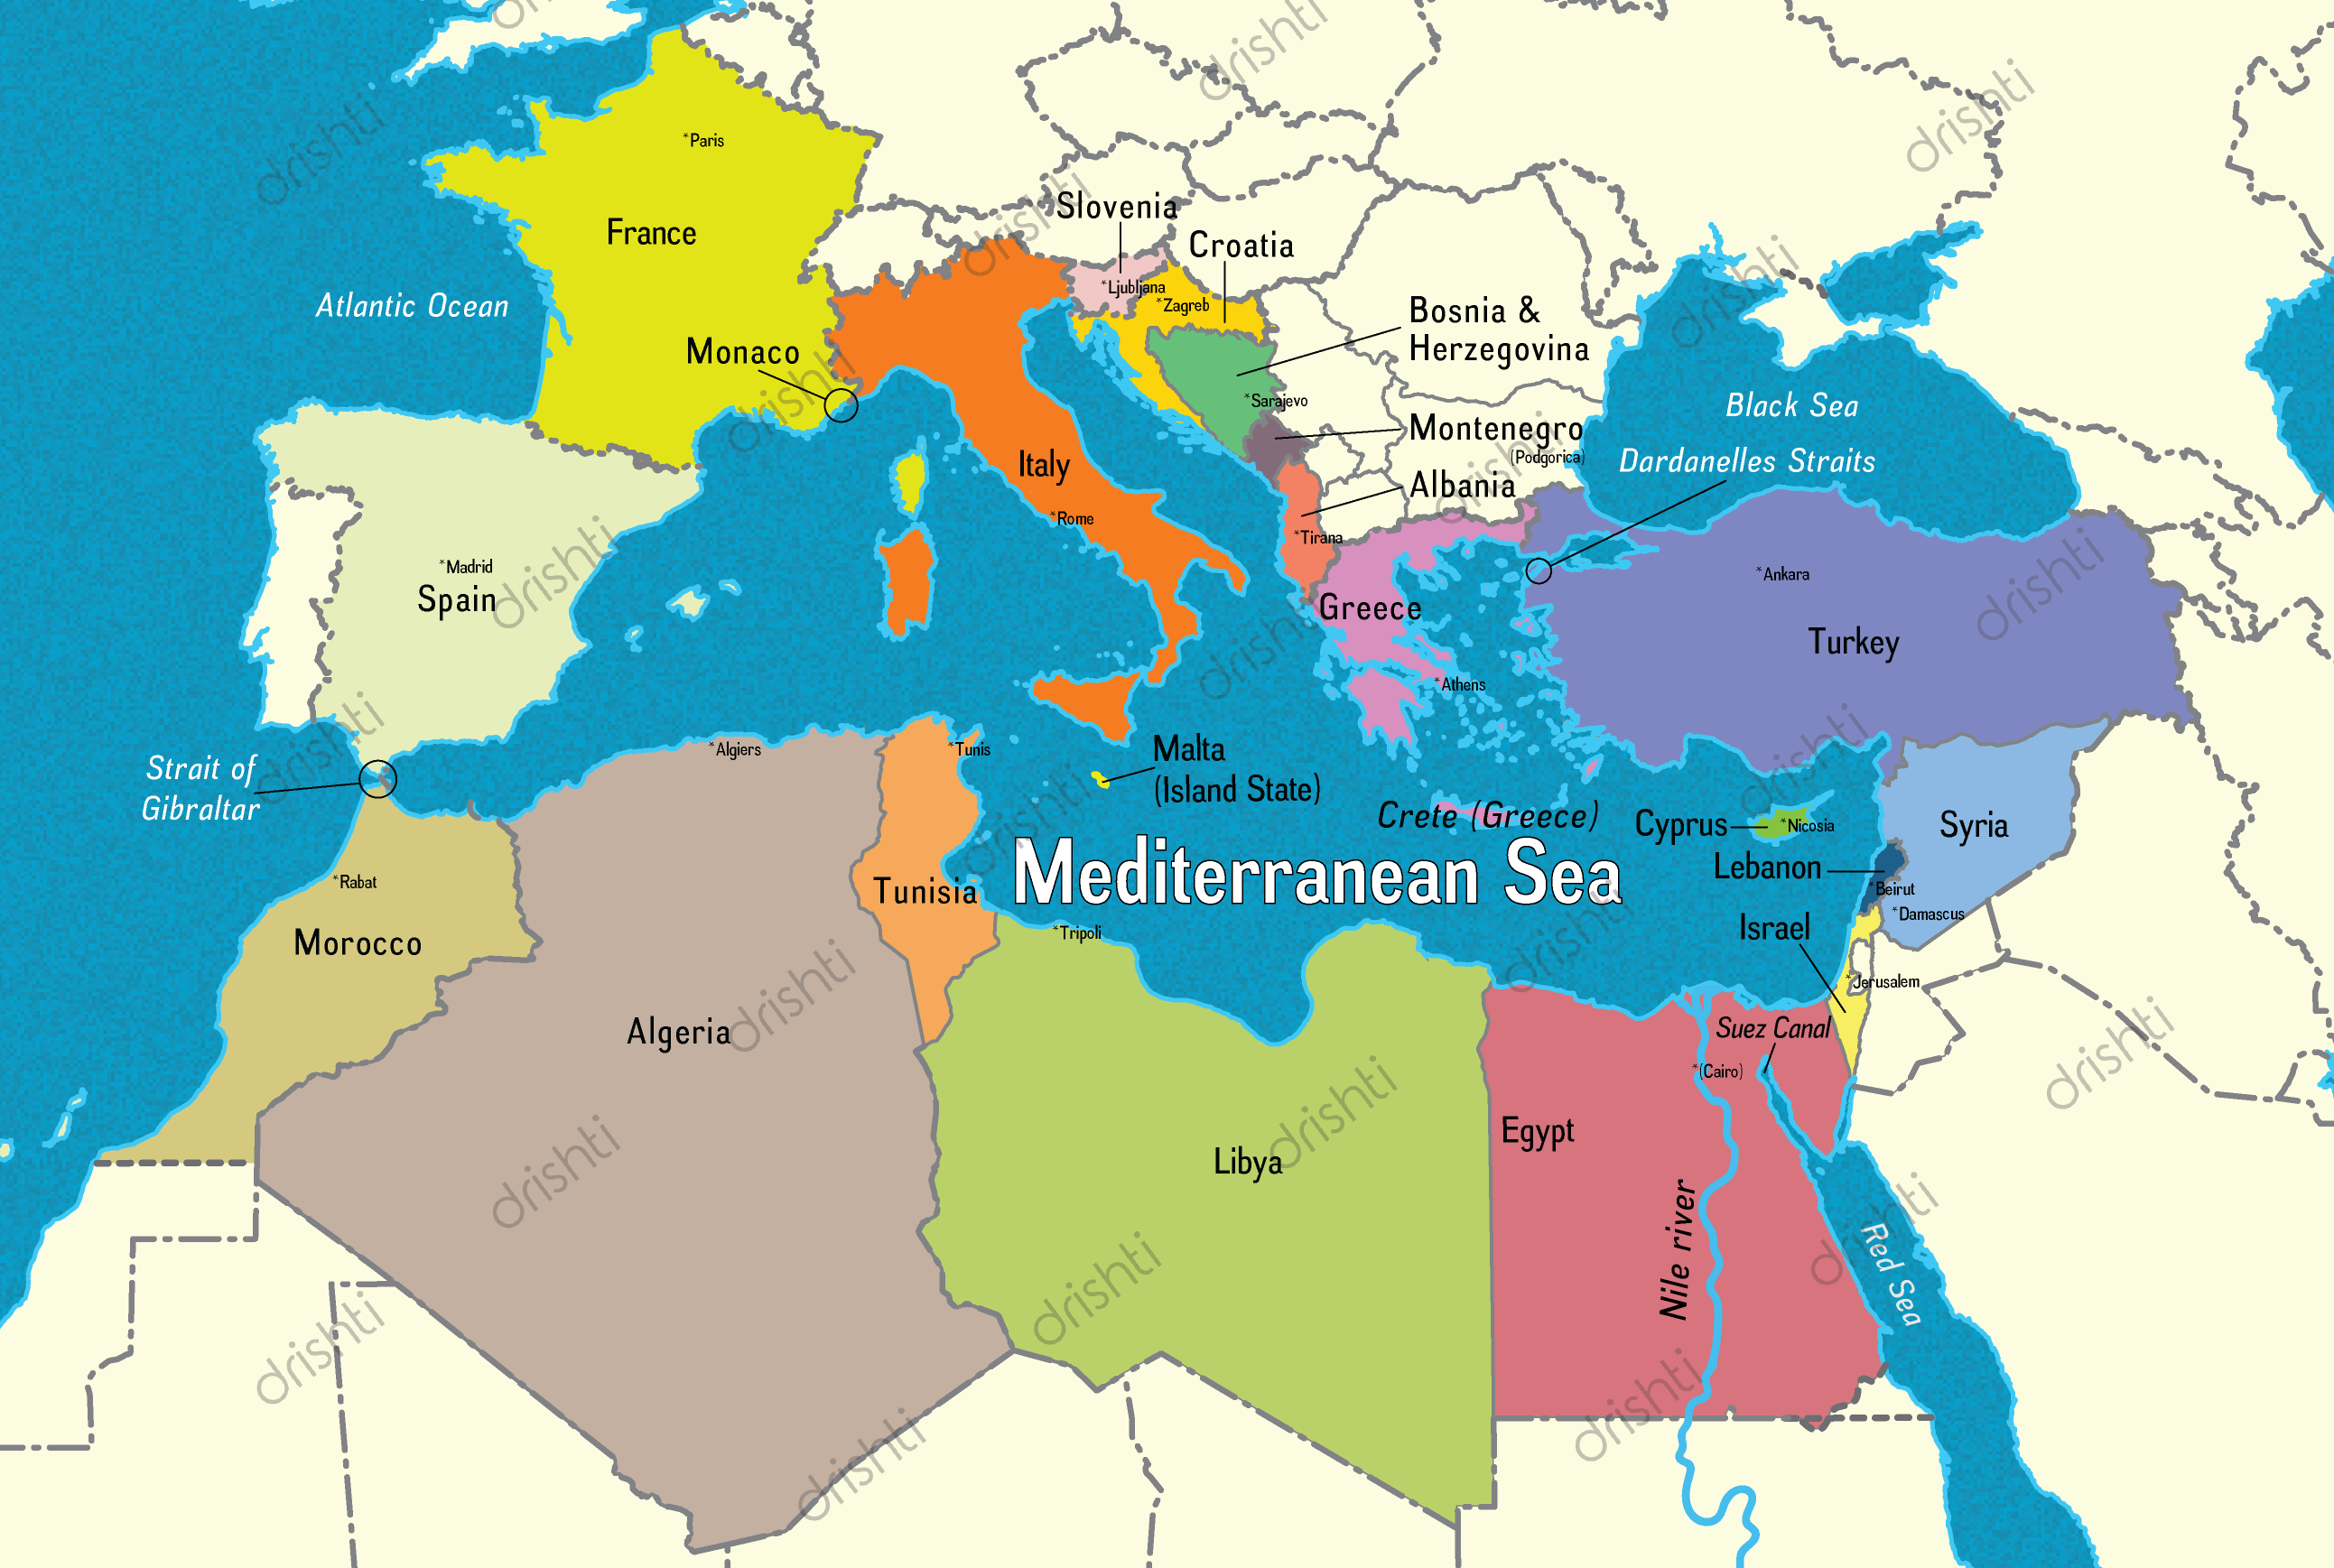 Which Countries Are Classed as The Mediterranean?